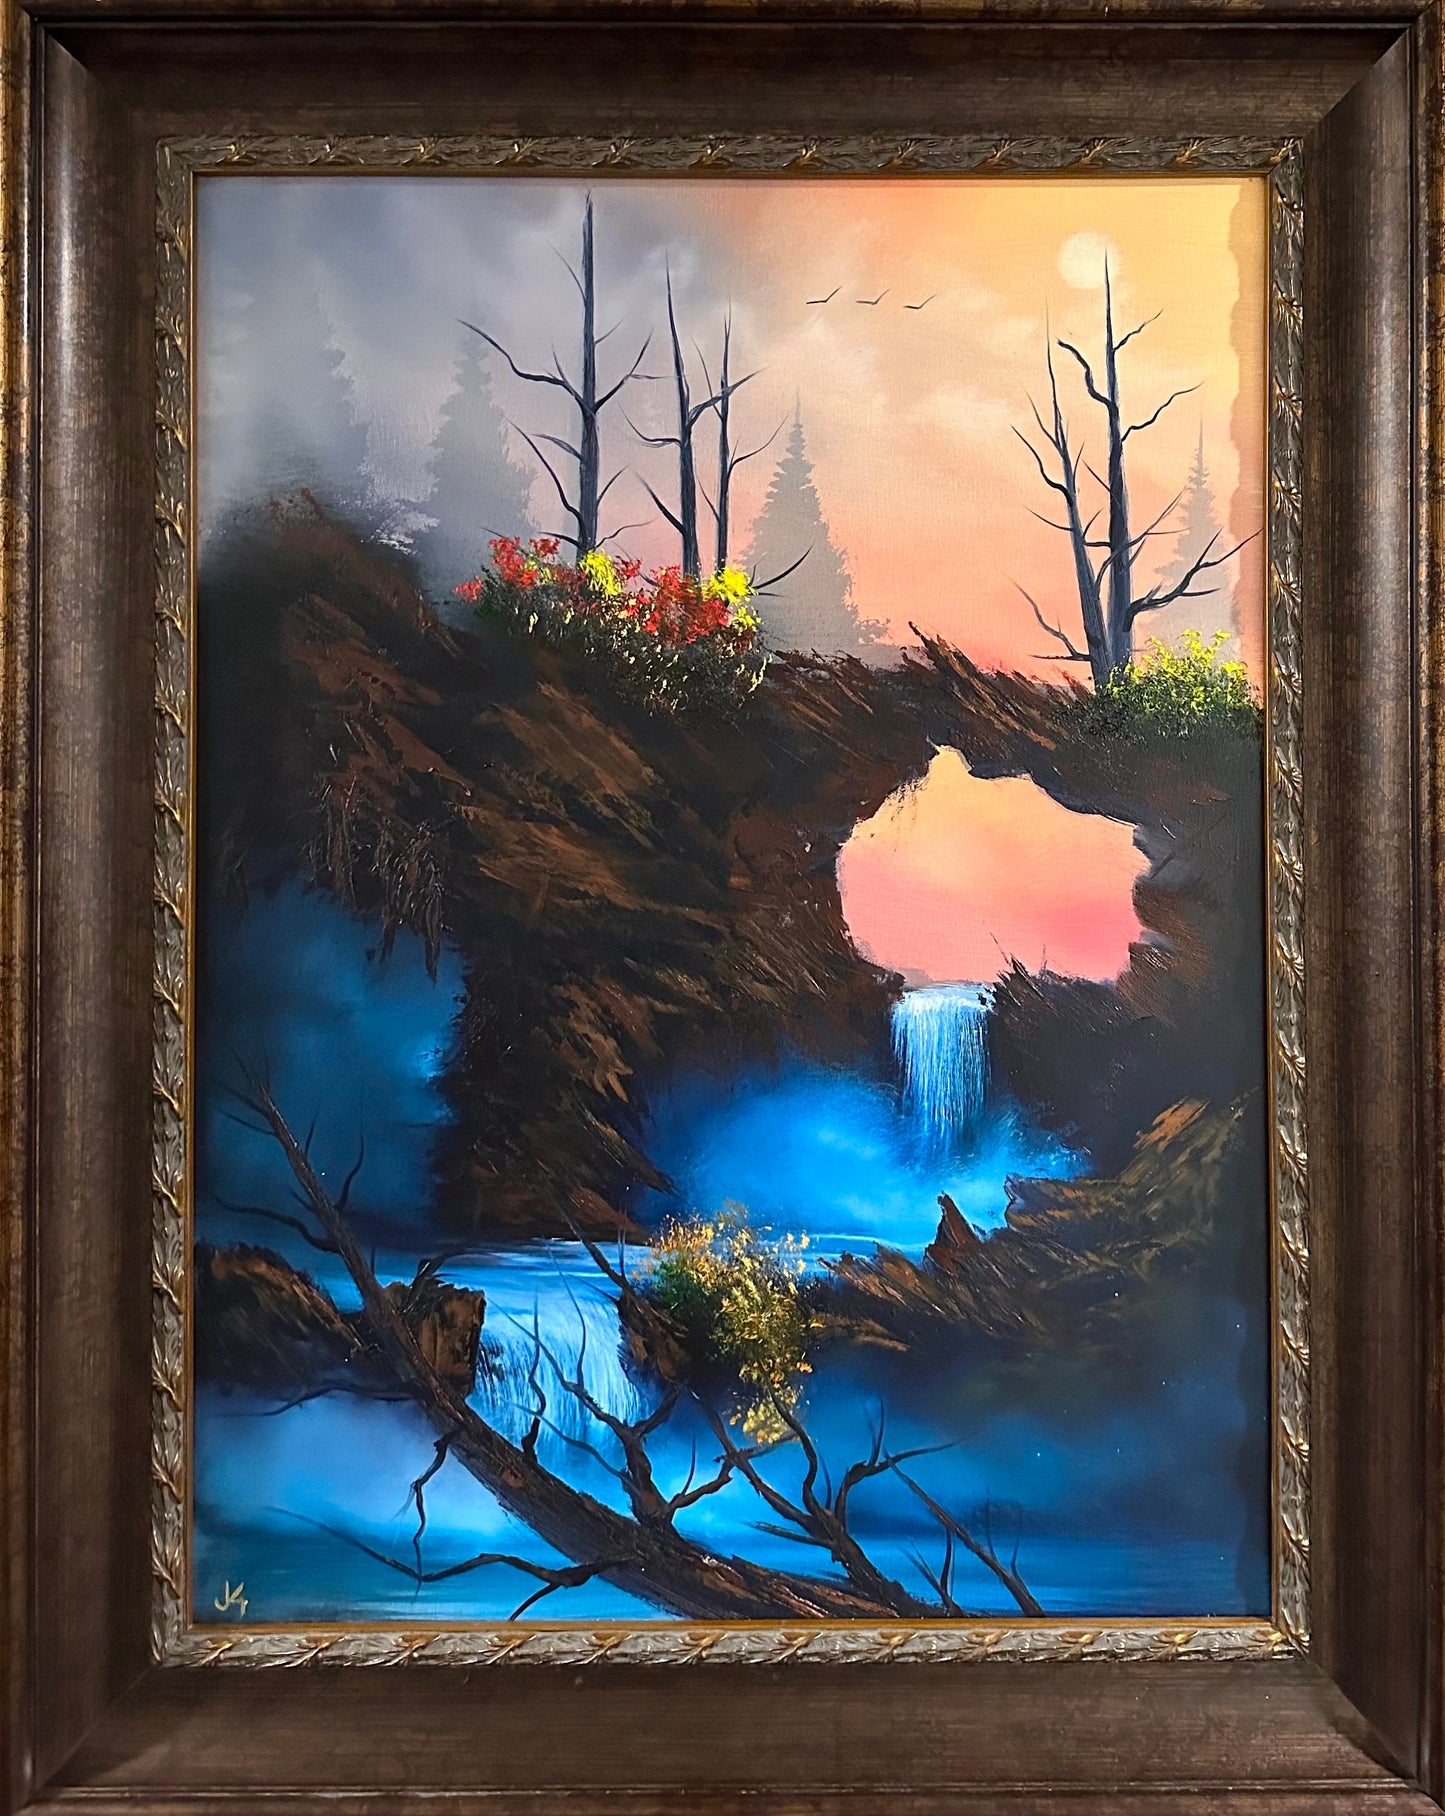 Painting 822 - 18x24" Sunset Canyon Waterfall with Heavy-duty Frame Painted Live at City of the World Art Gallery 6/17/23 by PaintWithJosh